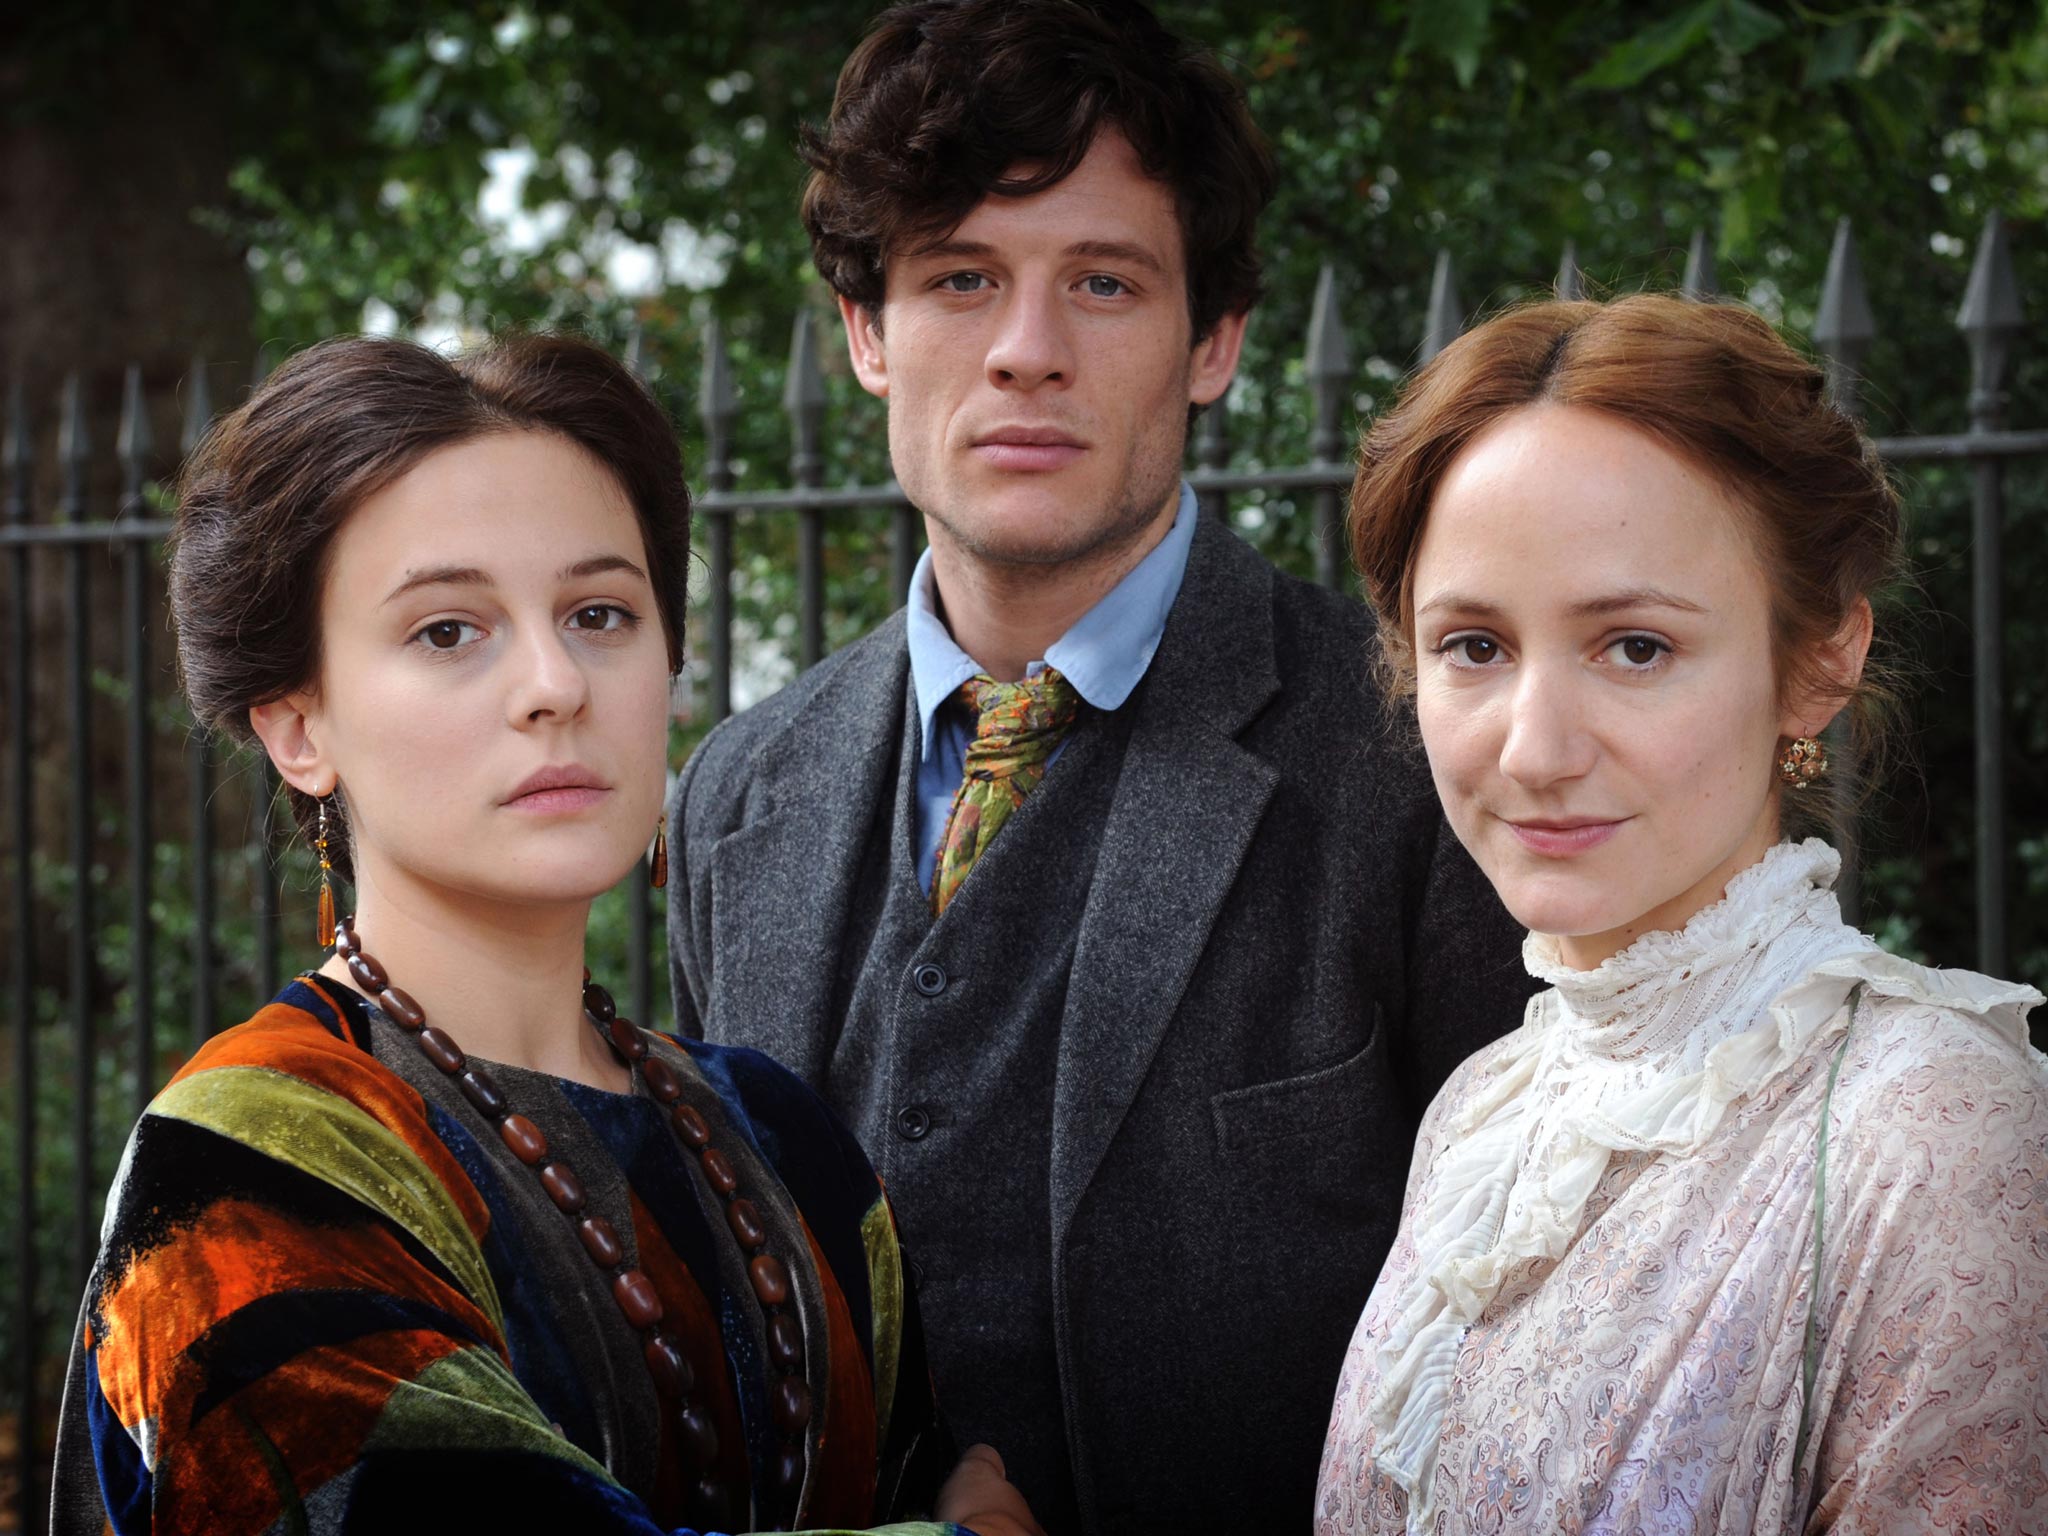 Phoebe Fox, James Norton and Lydia Lynch in ‘Life
in Squares’